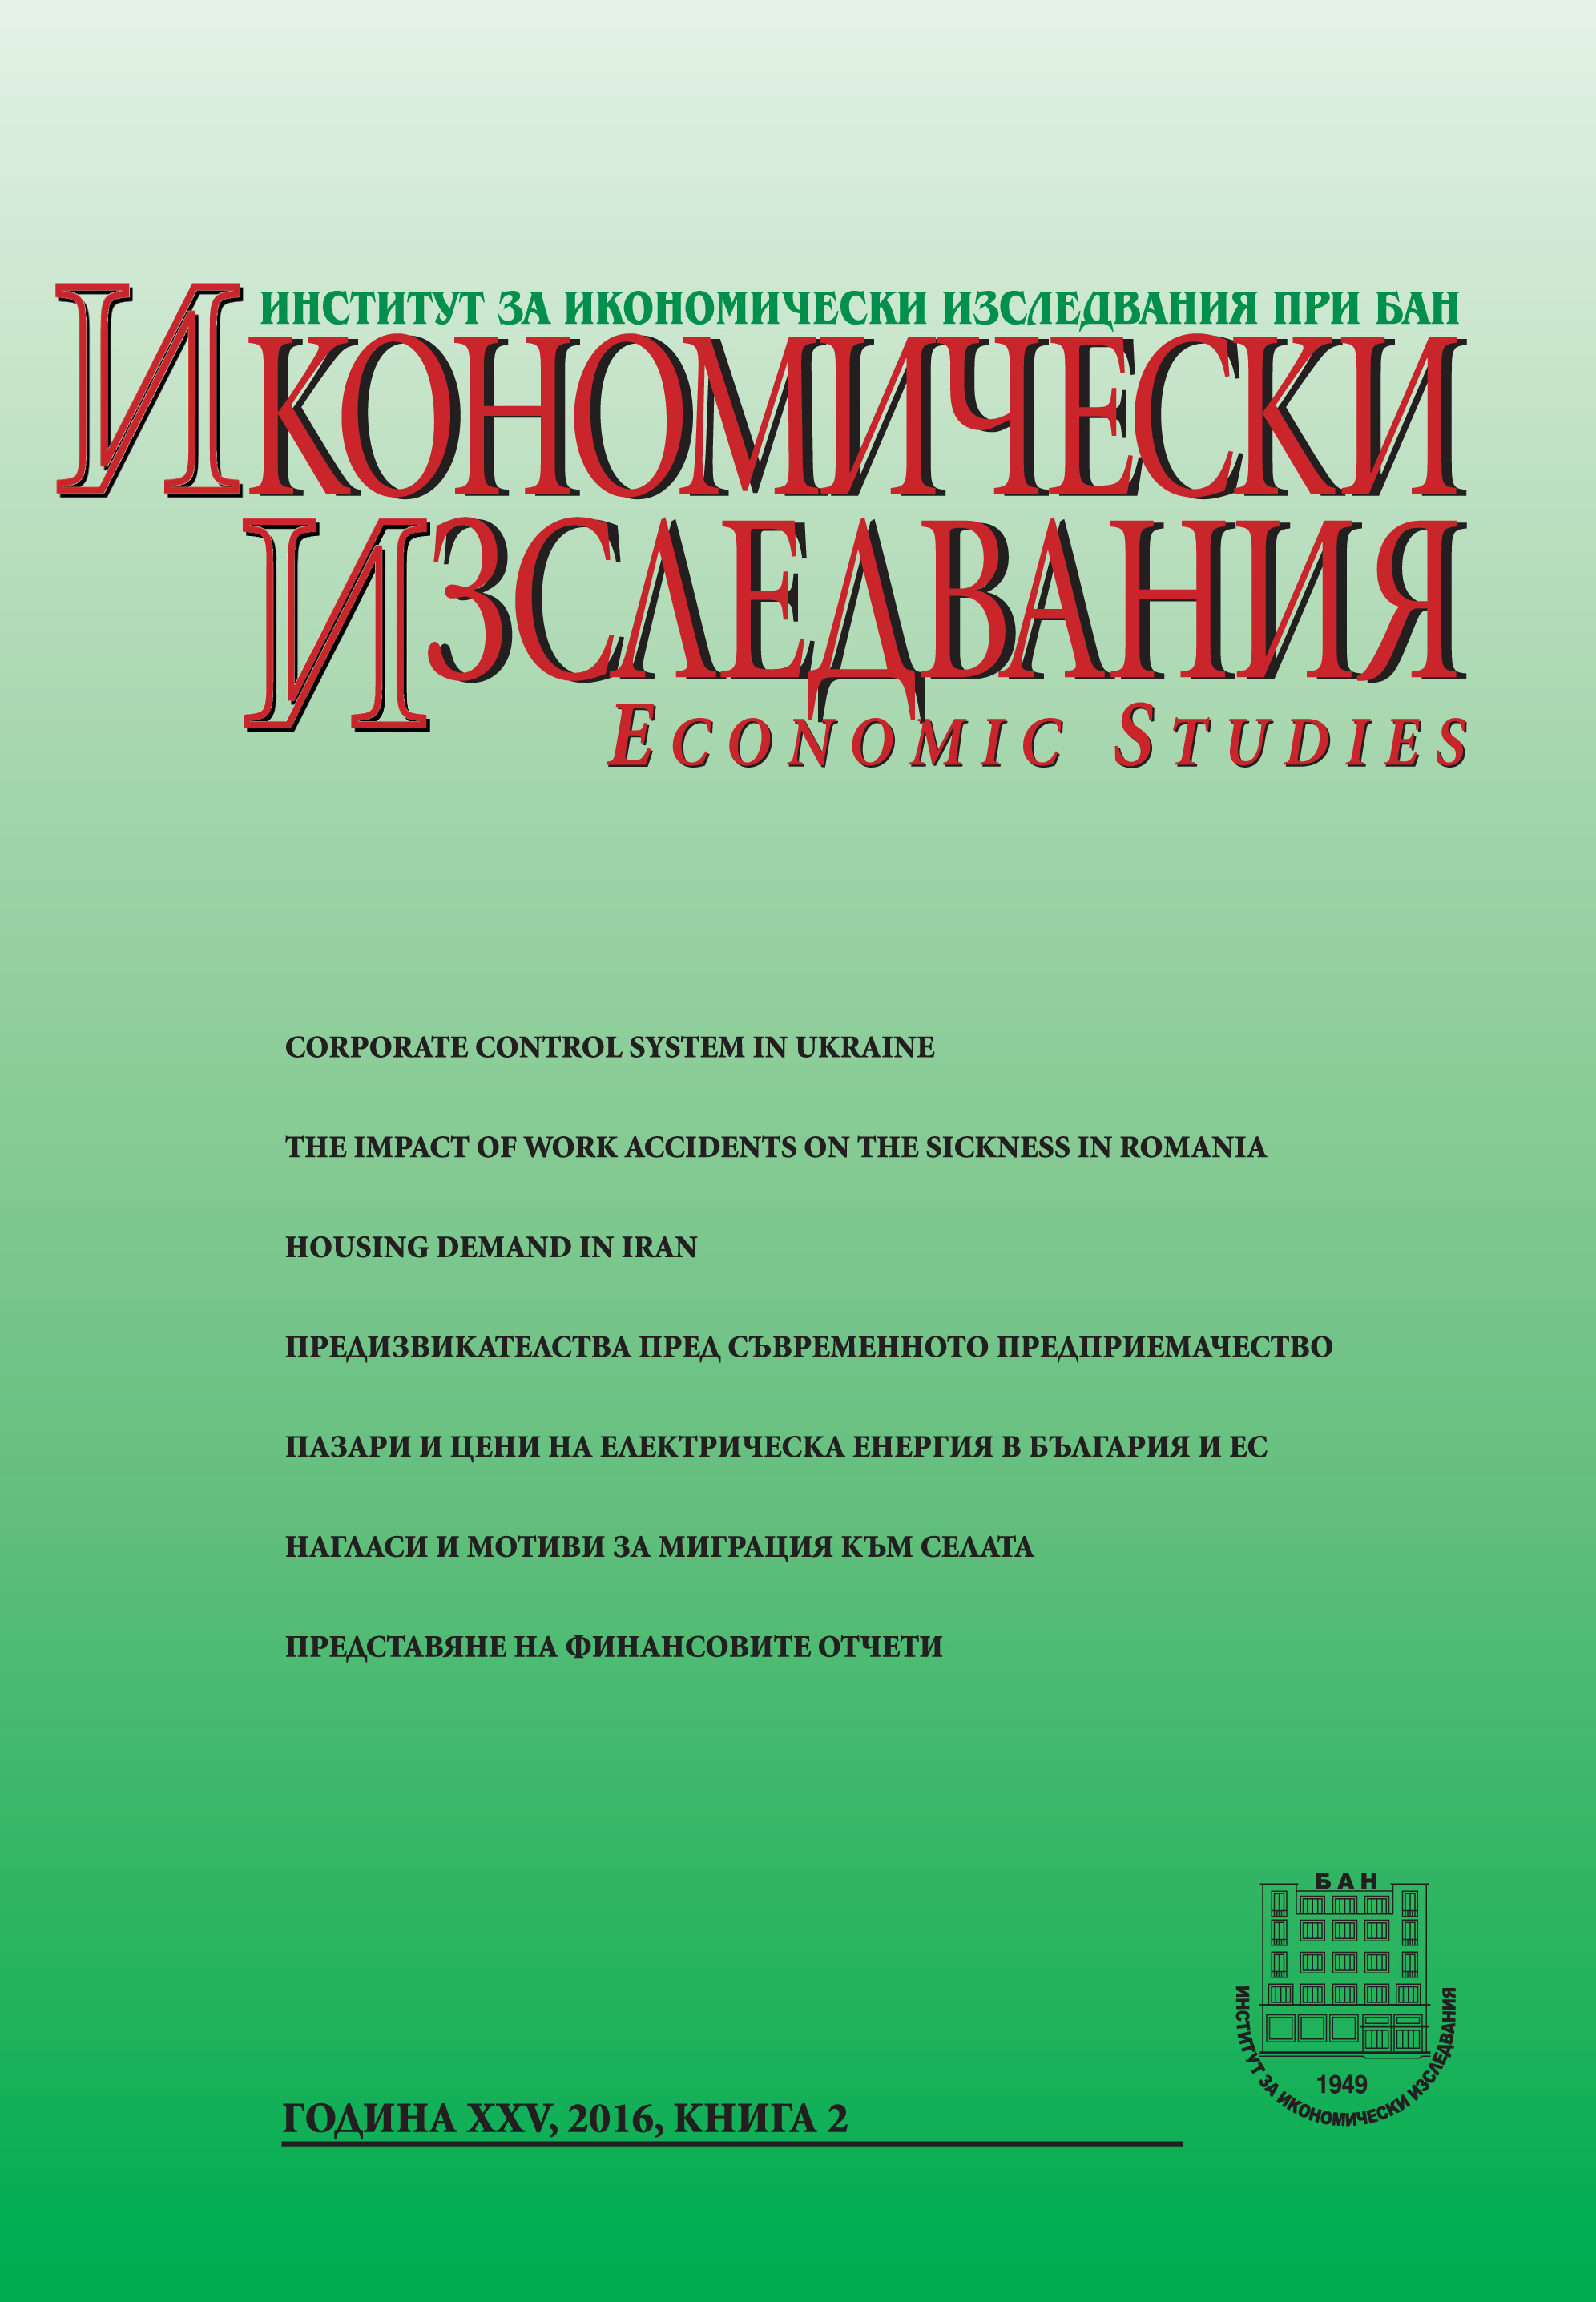 Theoretical and Methodological Aspects of Formation of Corporate Control System in Ukraine Cover Image